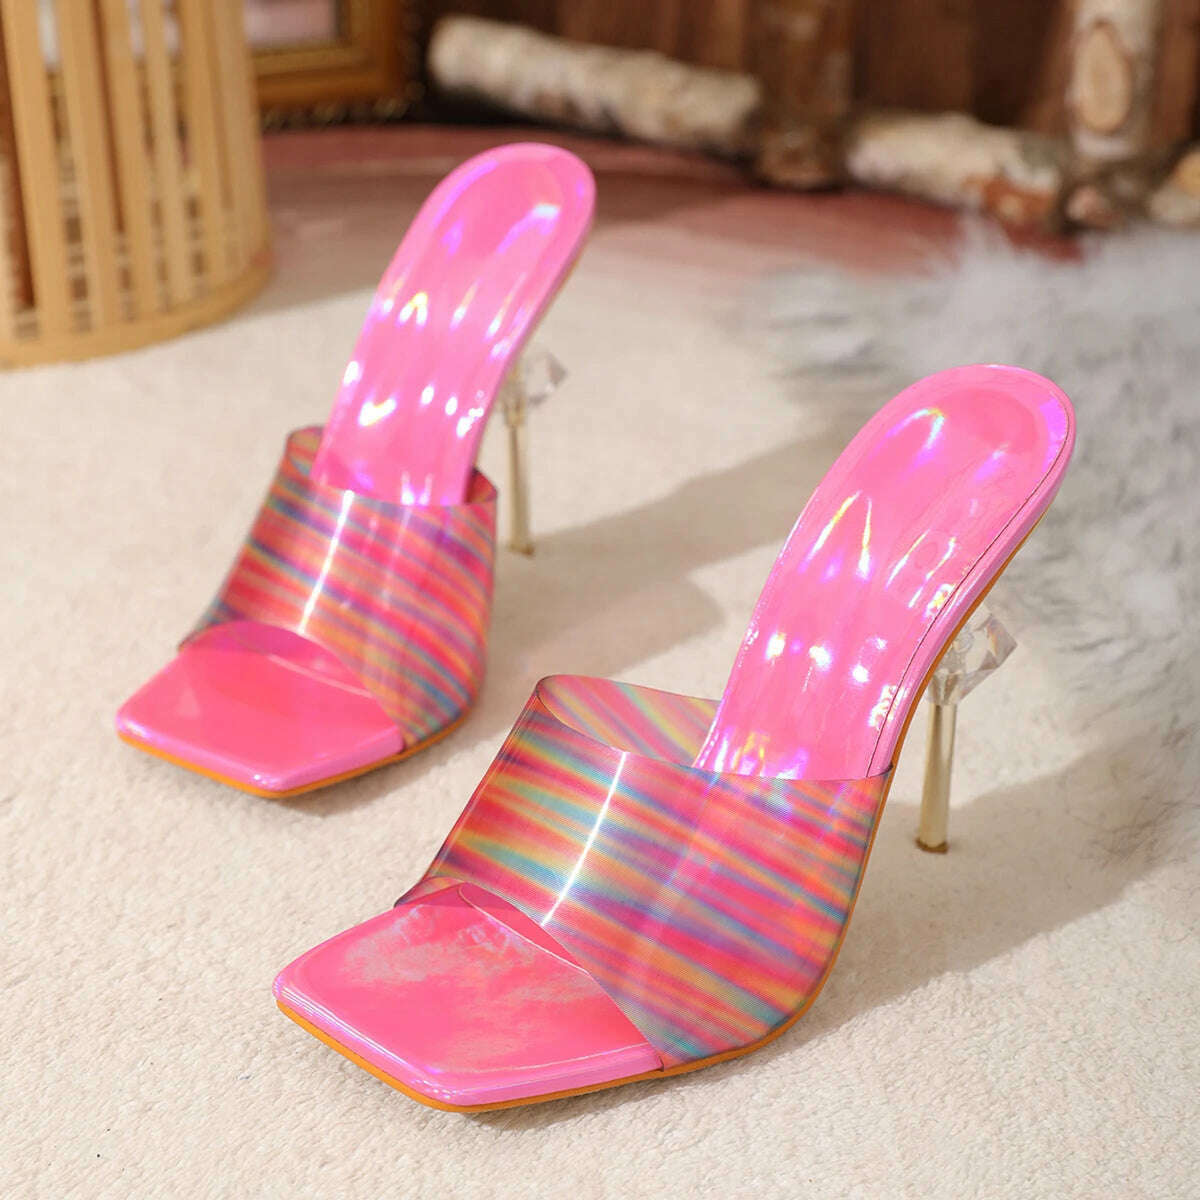 KIMLUD, Aneikeh Gradient Leather PVC Transparent Slippers For Women Sexy Square Toe Strange High Heels Sandals Summer Fashion Party Shoe, KIMLUD Women's Clothes